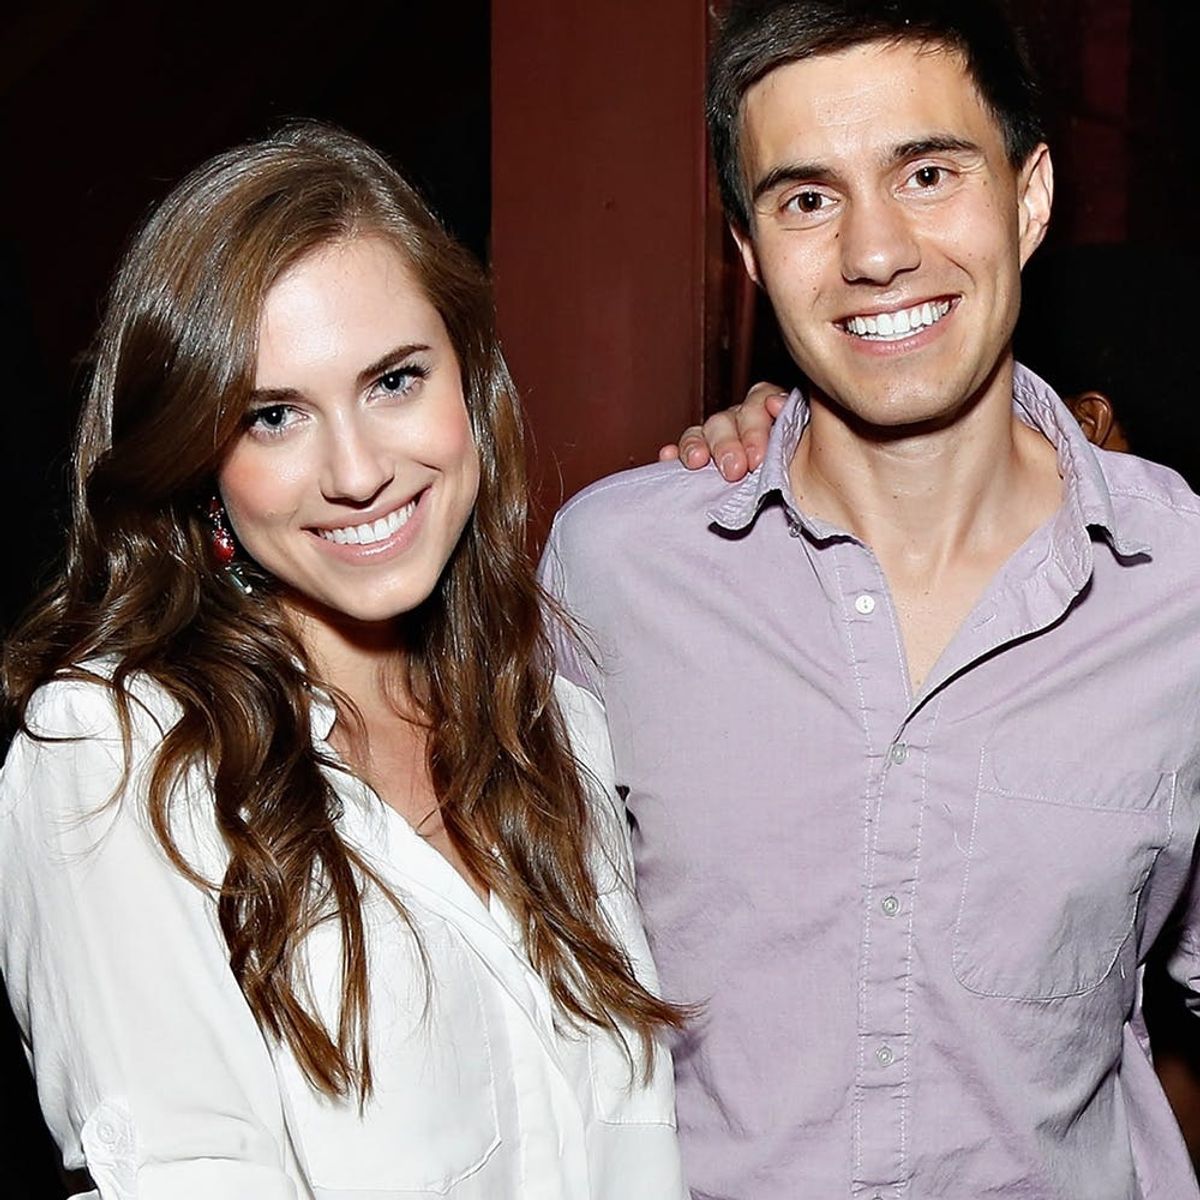 Allison Williams Reveals She Was Proposed to During a Viewing Party of The Bachelor